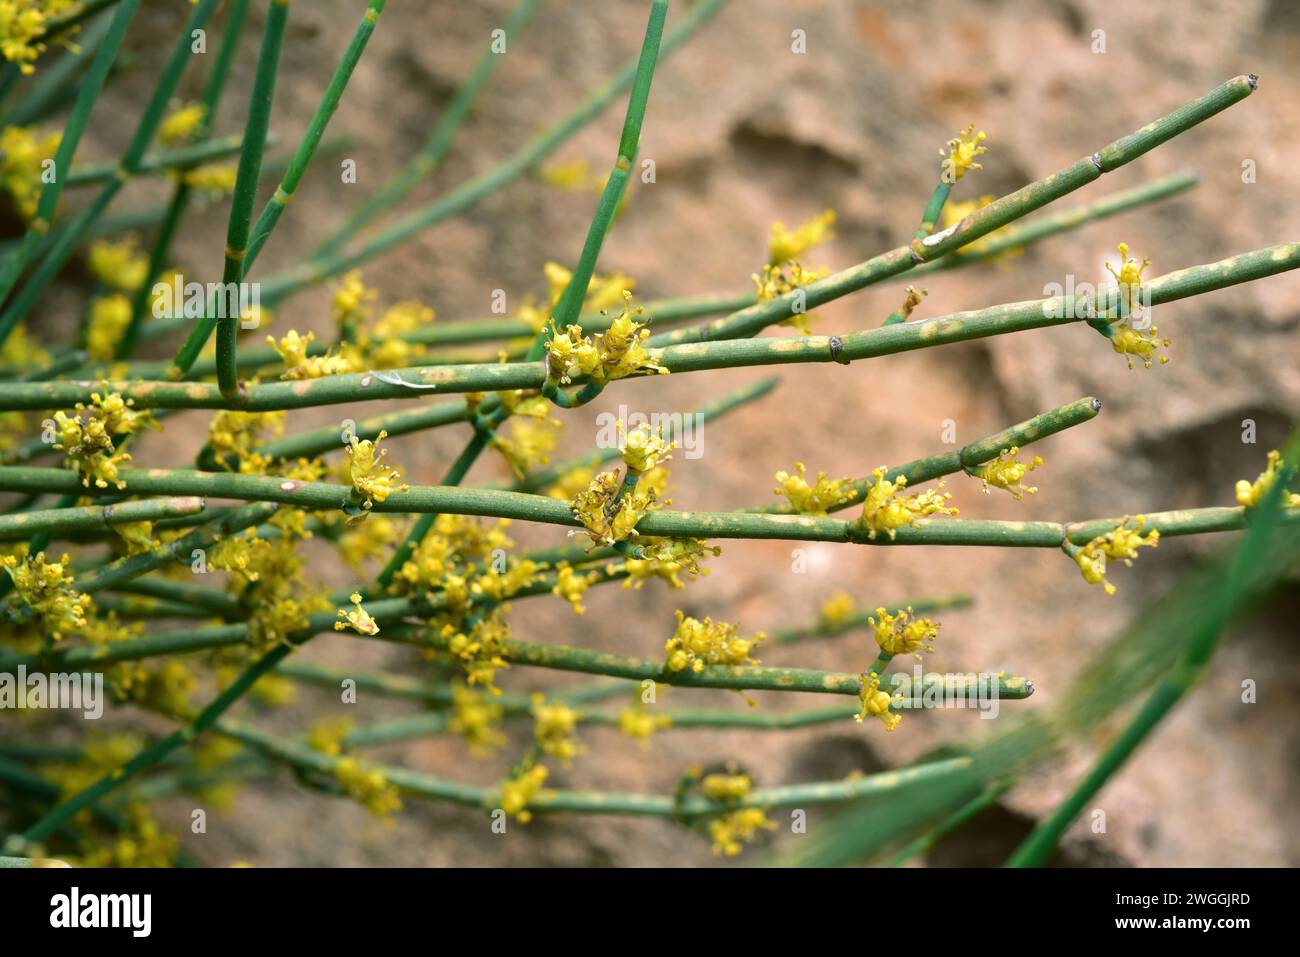 Joint pine (Ephedra fragilis) is a poisonous shrub native to eastern and western Mediterranean Basin. Flowers detail. This photo was taken in Menorca, Stock Photo